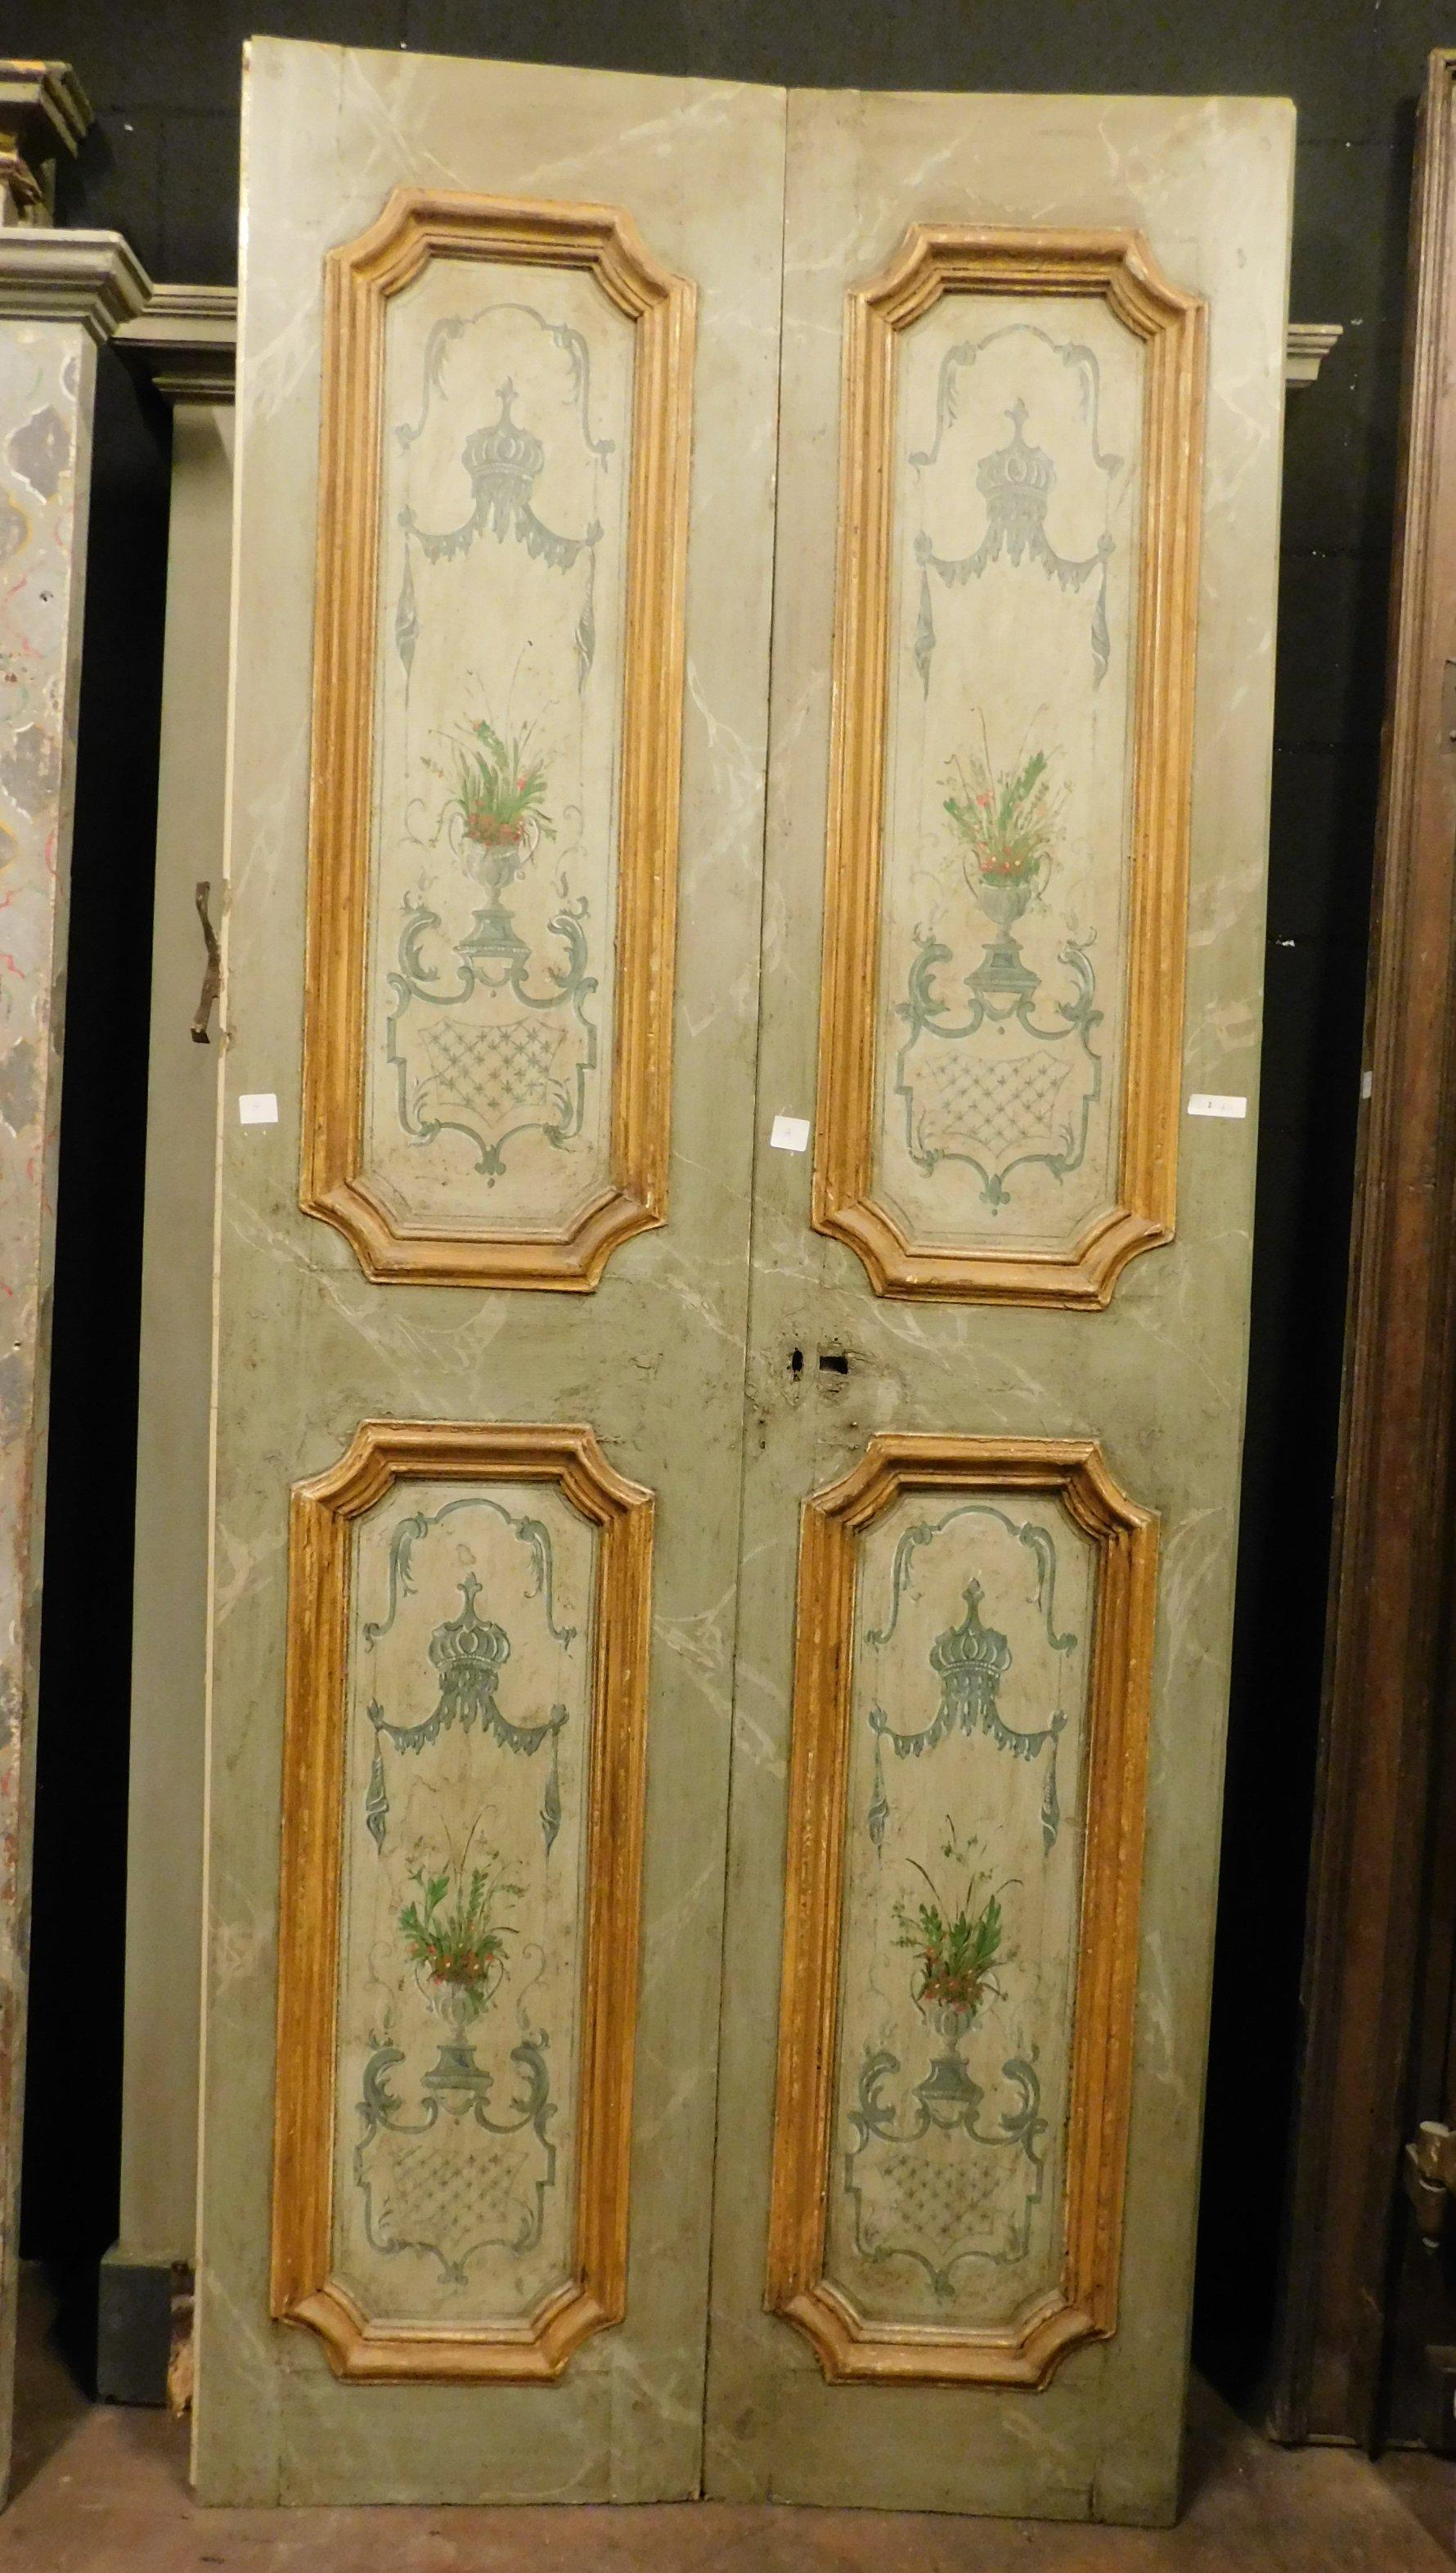 Set of 2 antique doors, lacquered and hand painted with fomrelle with typical floral designs, predominantly green and yellow, hand-built in the 18th century for a palazzo in Italy, in Rome
The two double doors have different sizes, they need to be